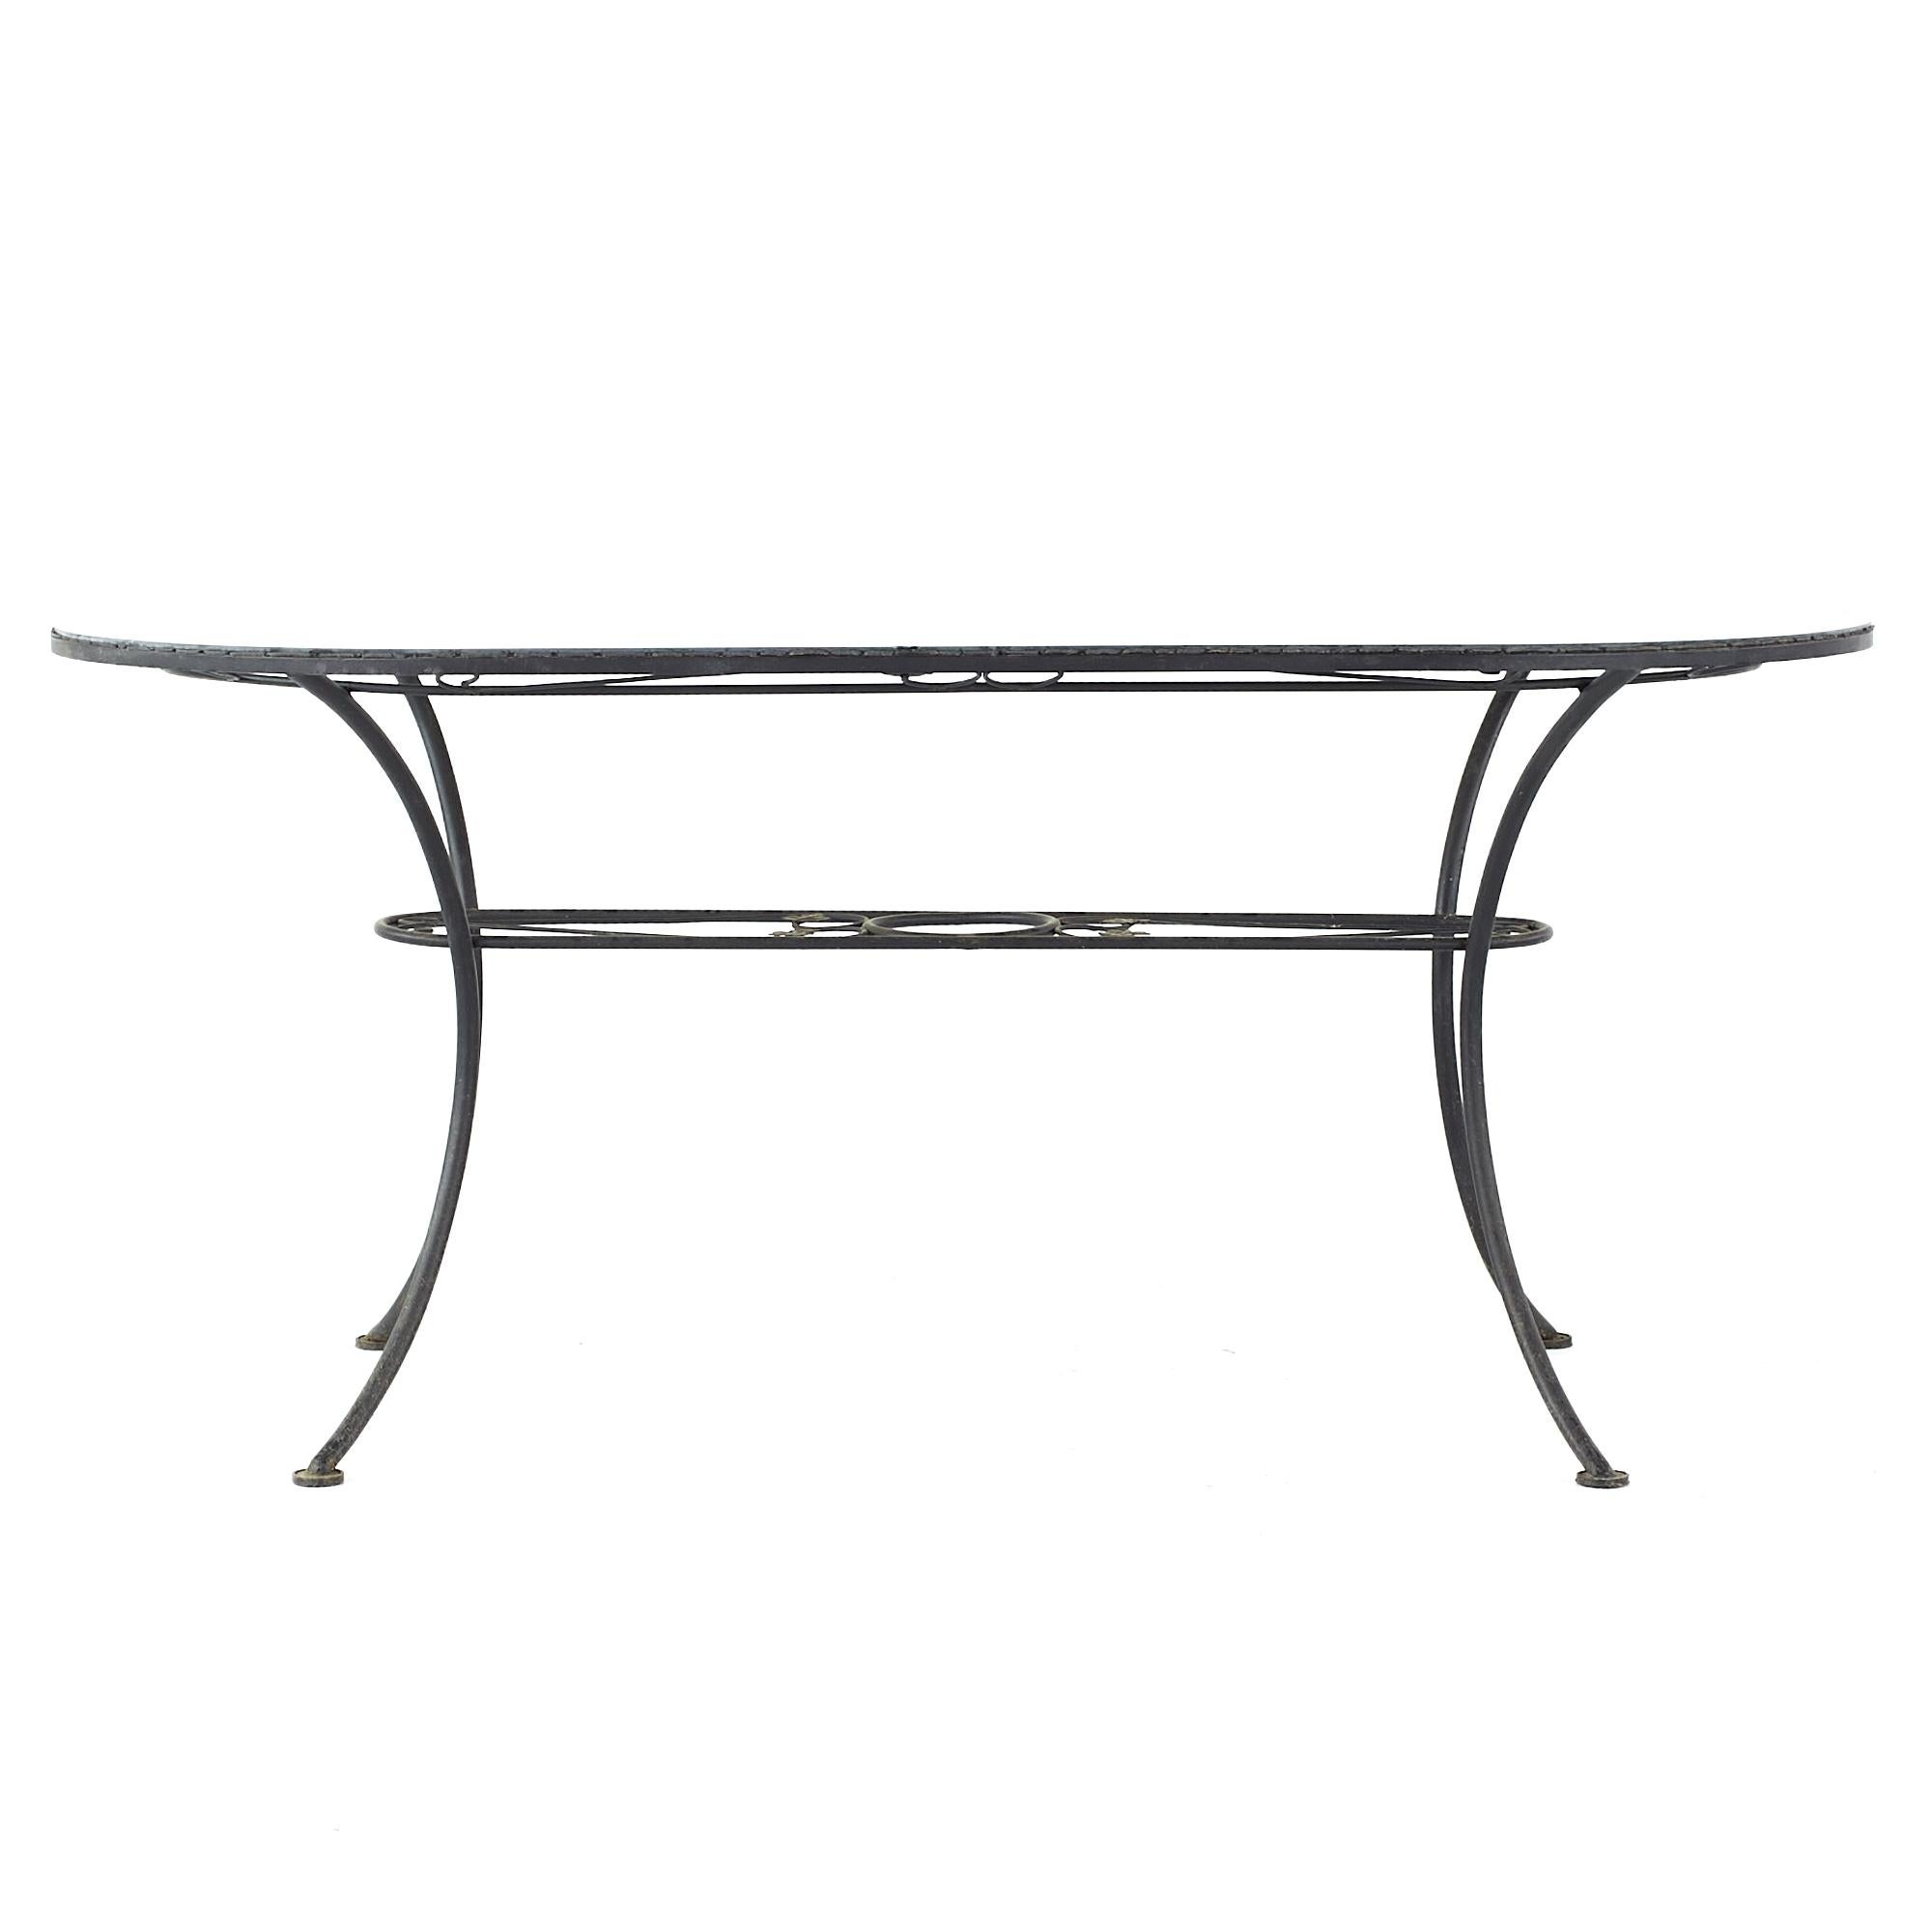 Arthur Umanoff for Shaver Howard midcentury Glass Top Dining Table

This dining table measures: 66.25 wide x 32.25 deep x 29.5 high, with a chair clearance of 28.5 inches

All pieces of furniture can be had in what we call restored vintage